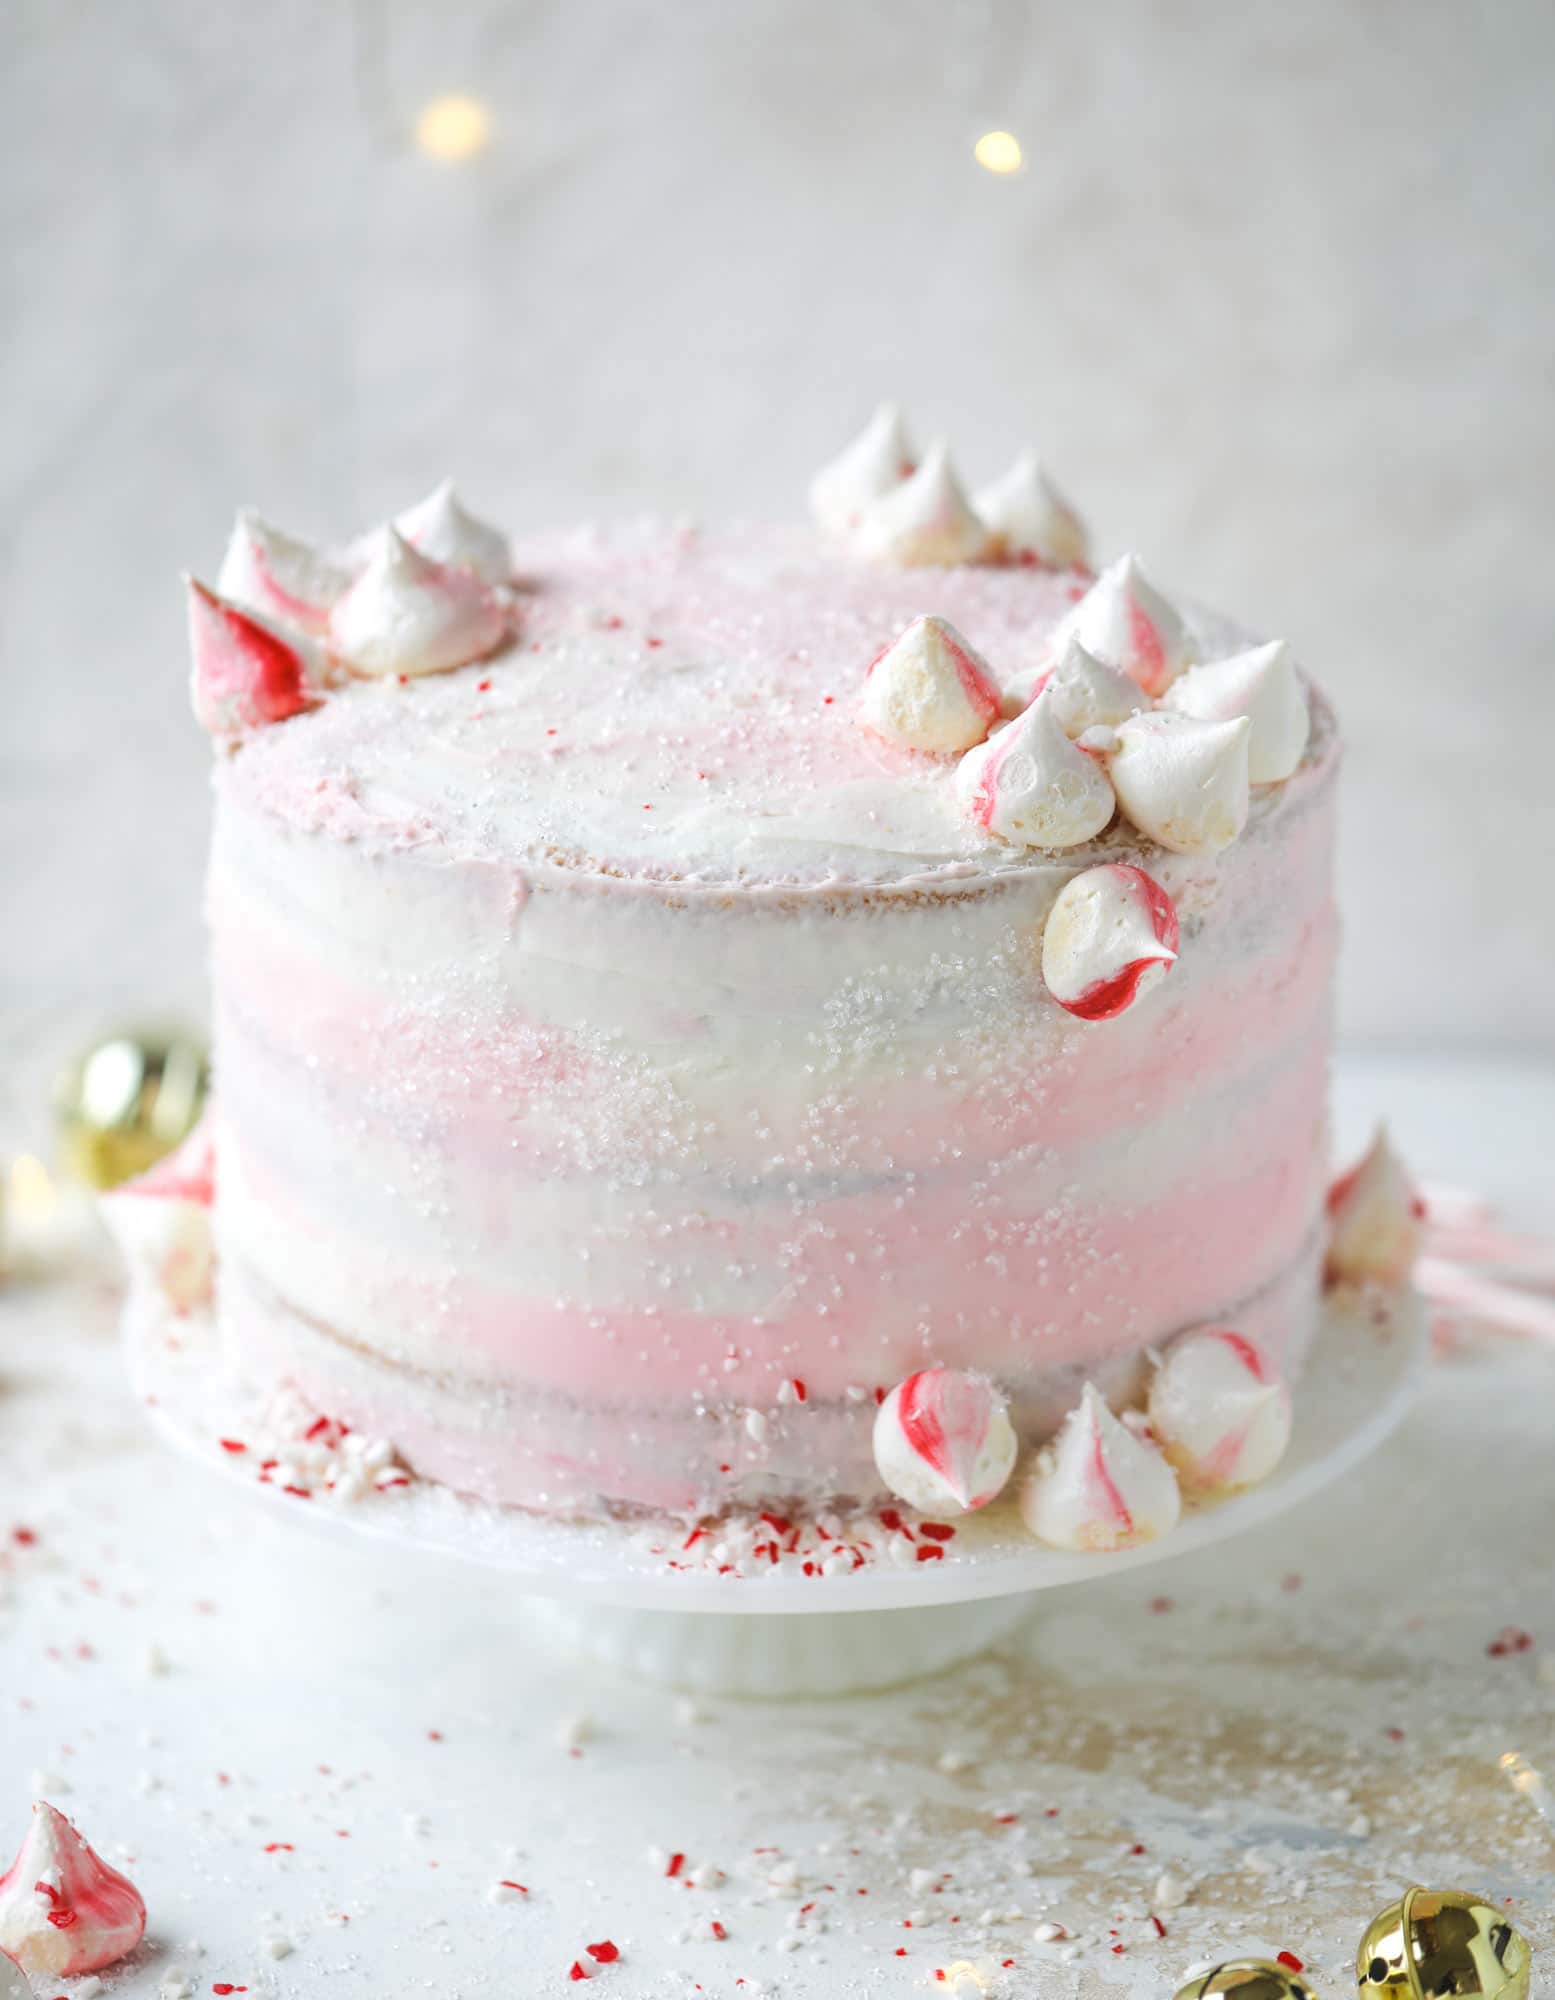 How to Make Beautiful Layer Cakes - Style Sweet